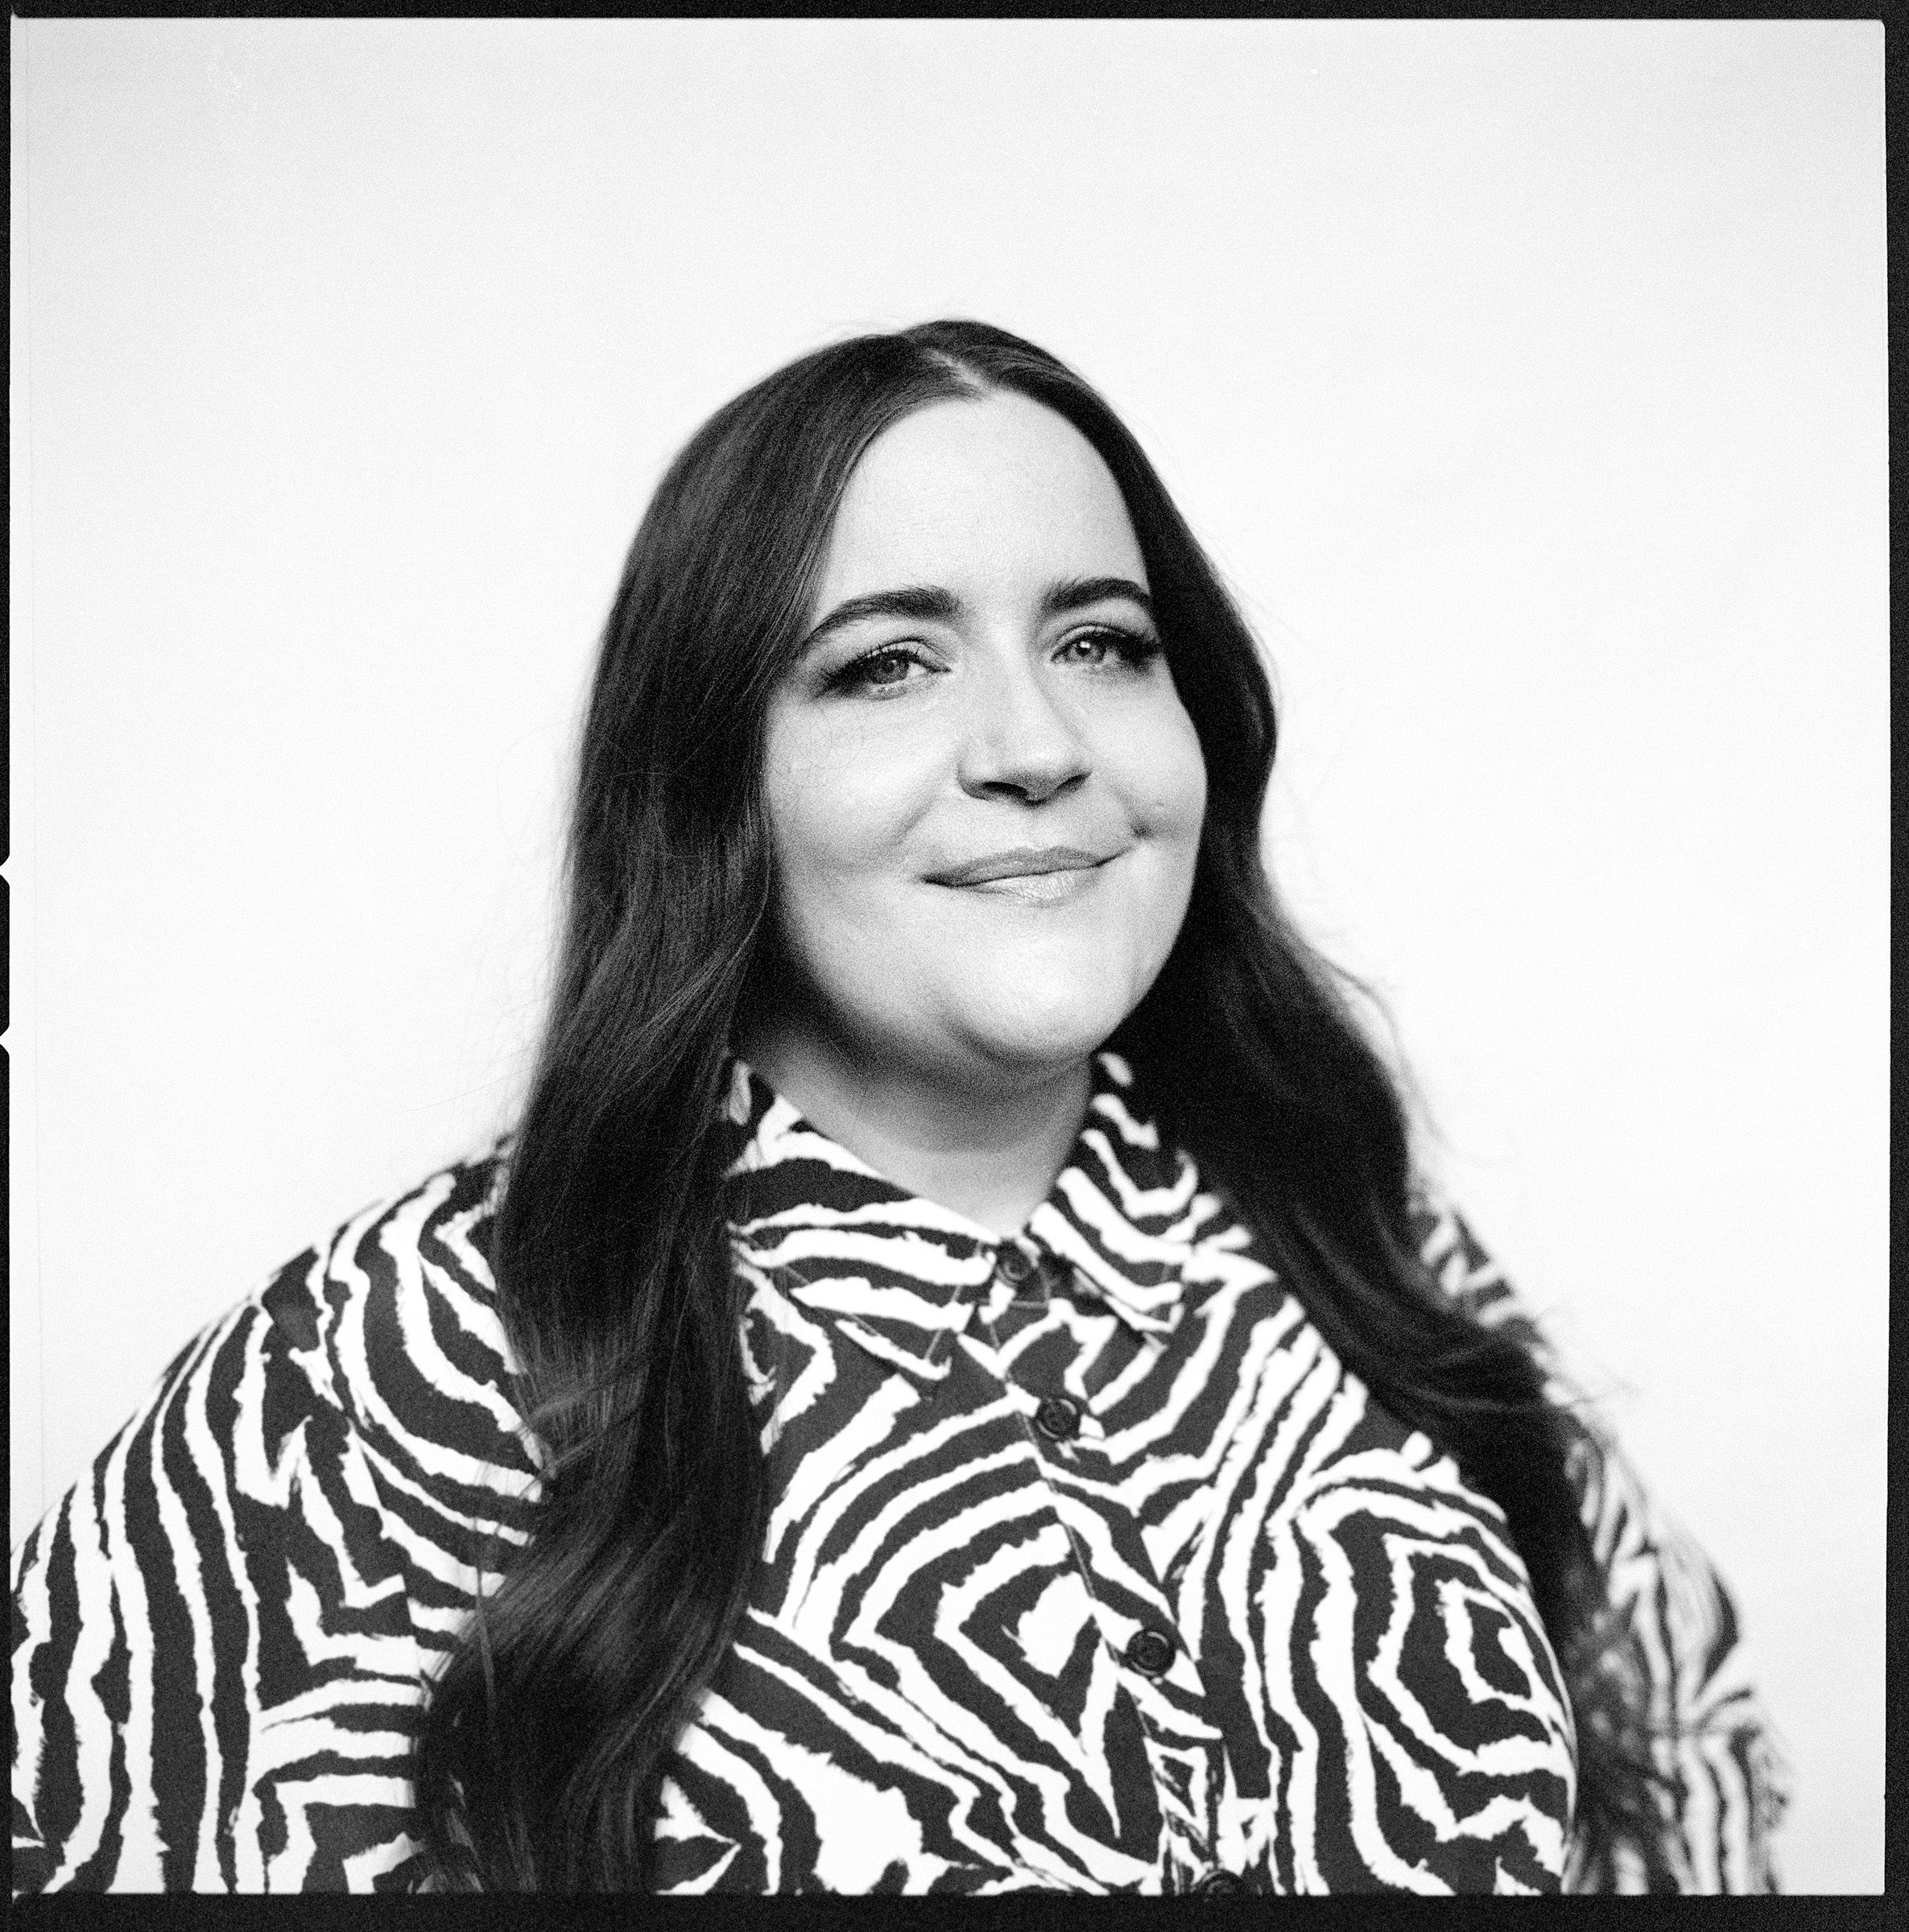 Aidy Bryant, SNL, Entertainment Industry Photography New York - Shot by Jesse Dittmar